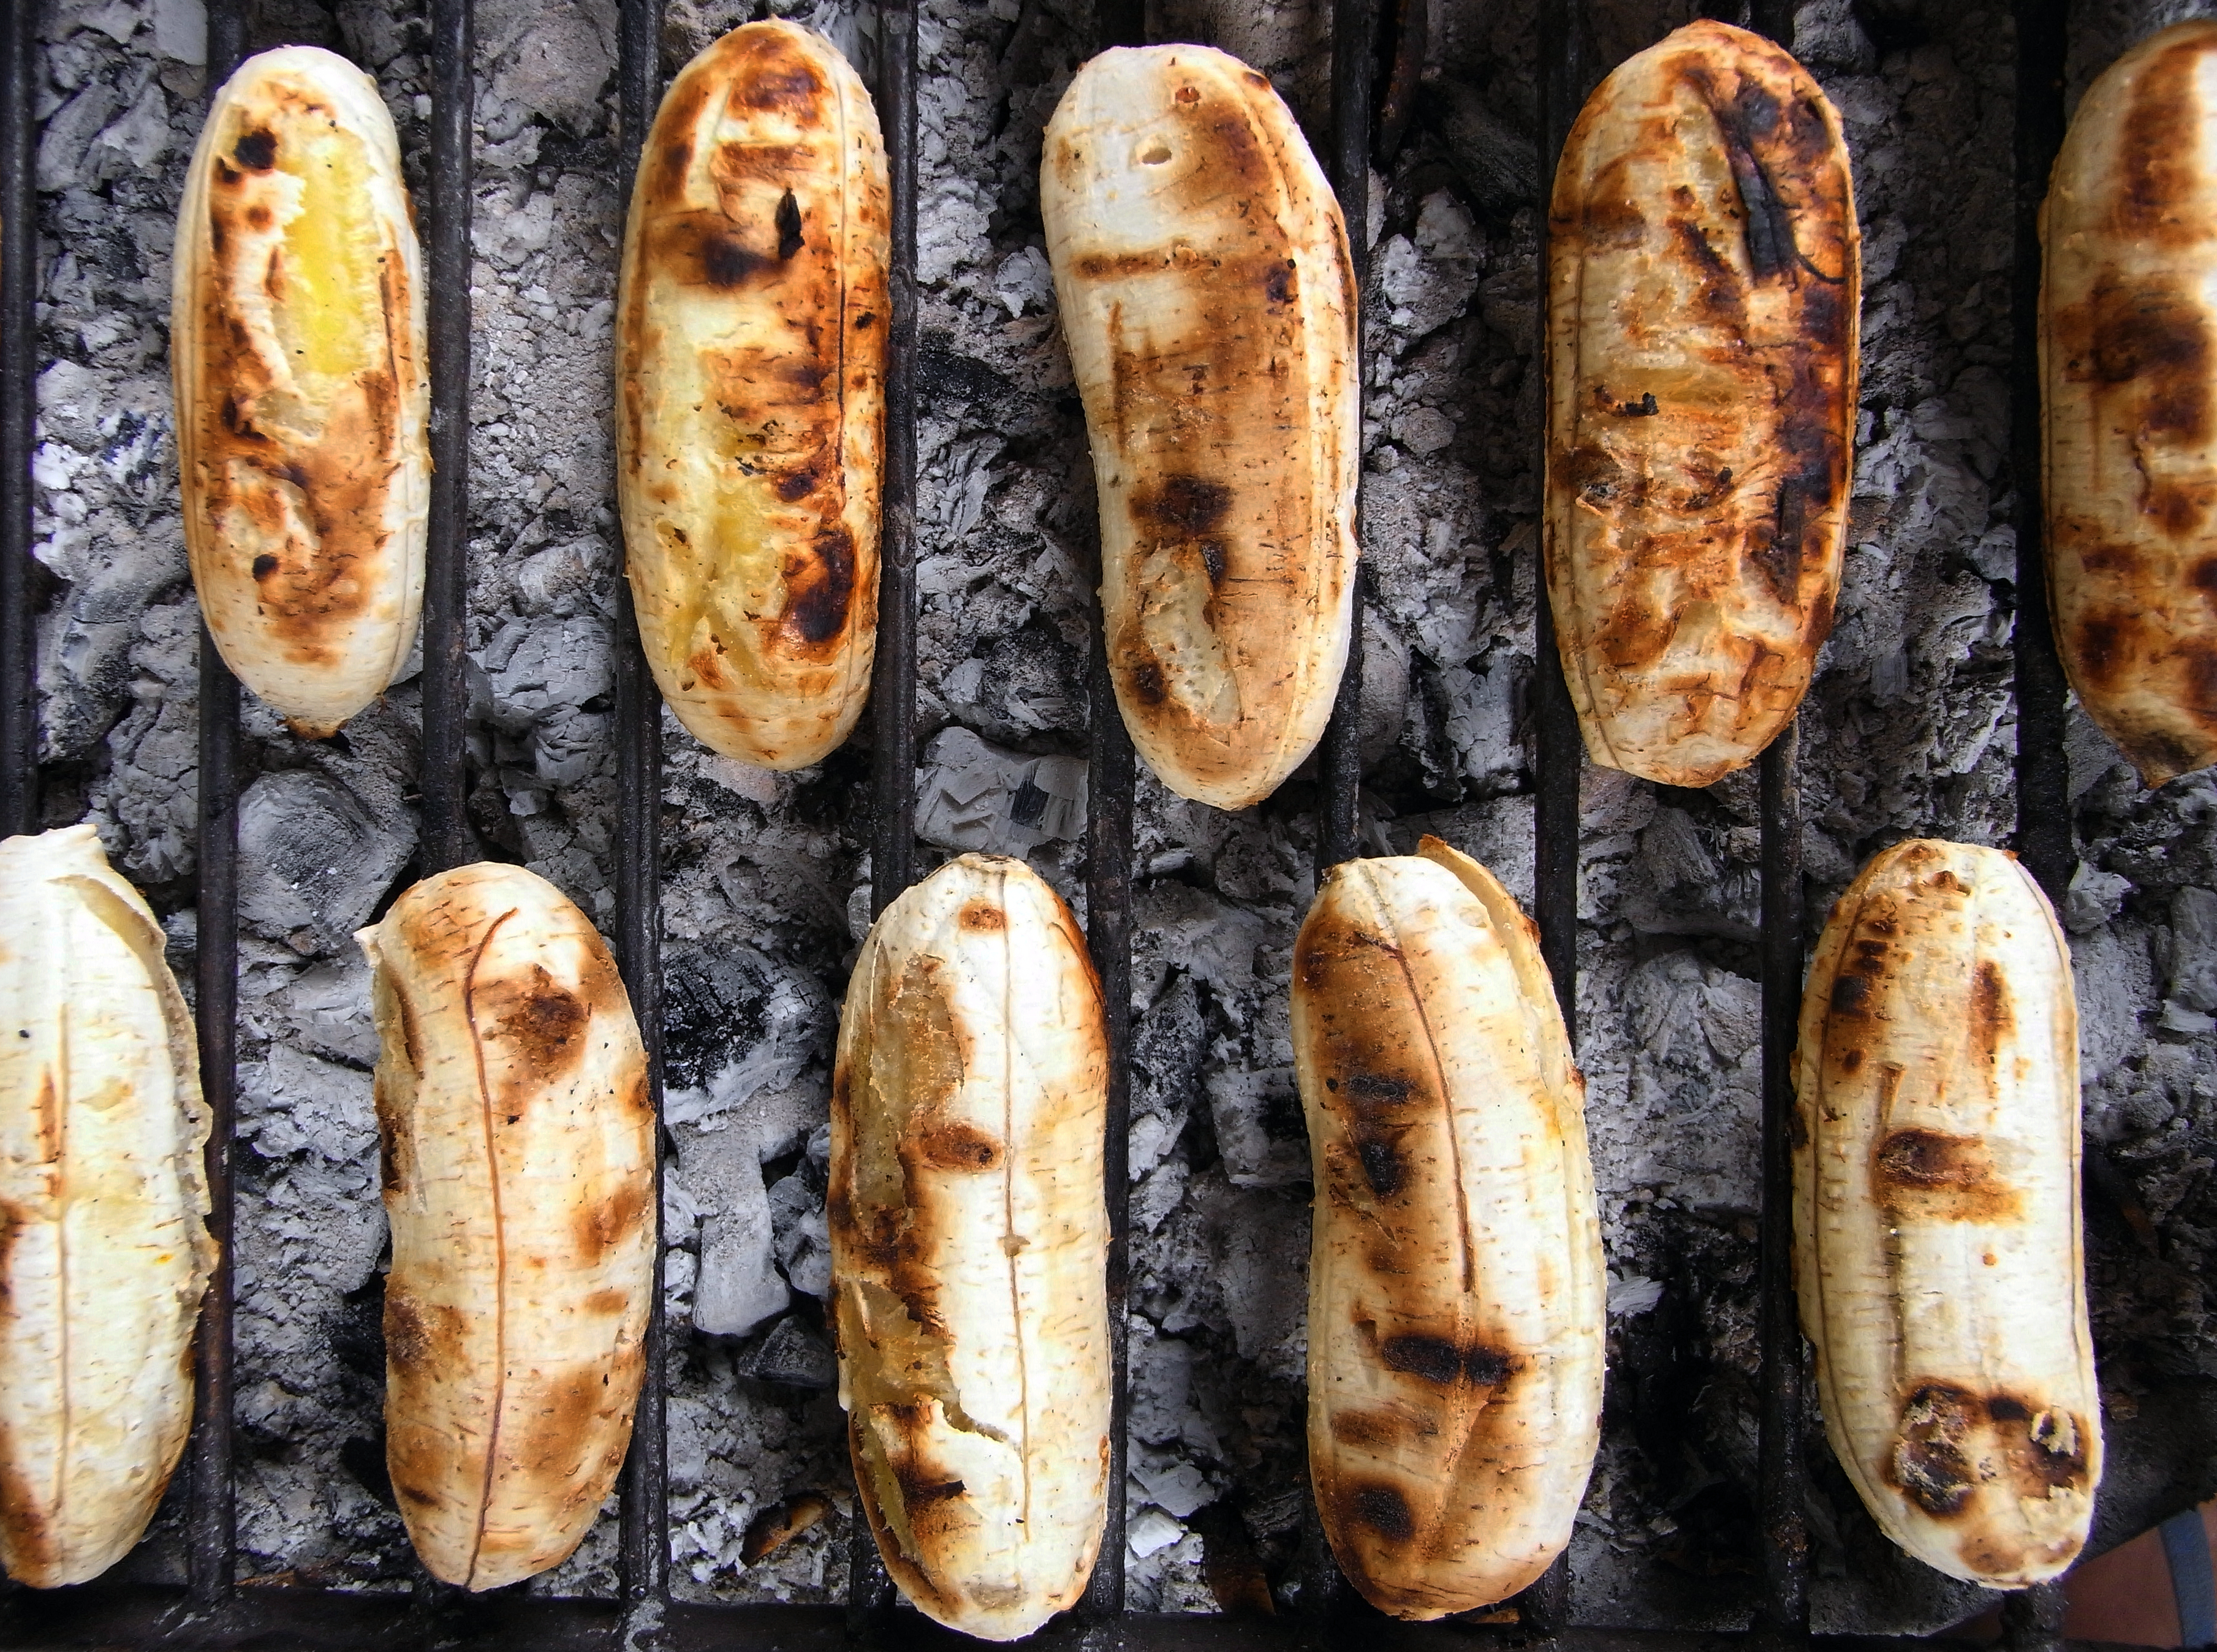 Grilled small bananas